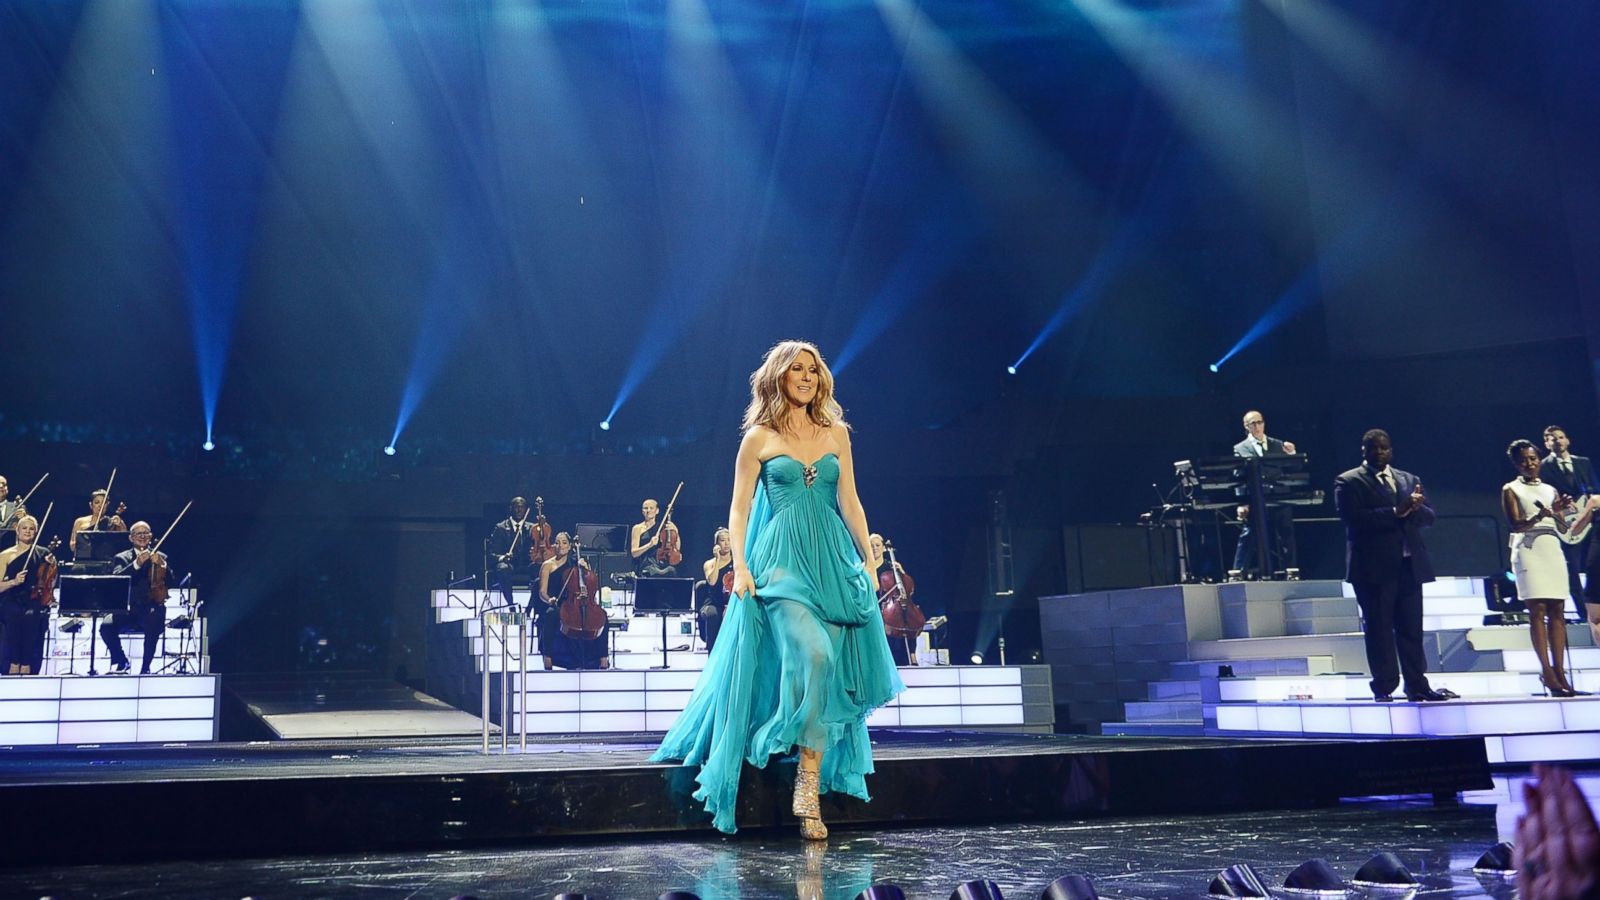 CELINE DION SAYS GOODBYE TO HER GROUNDBREAKING LAS VEGAS RESIDENCY AT THE  COLOSSEUM AT CAESARS PALACE